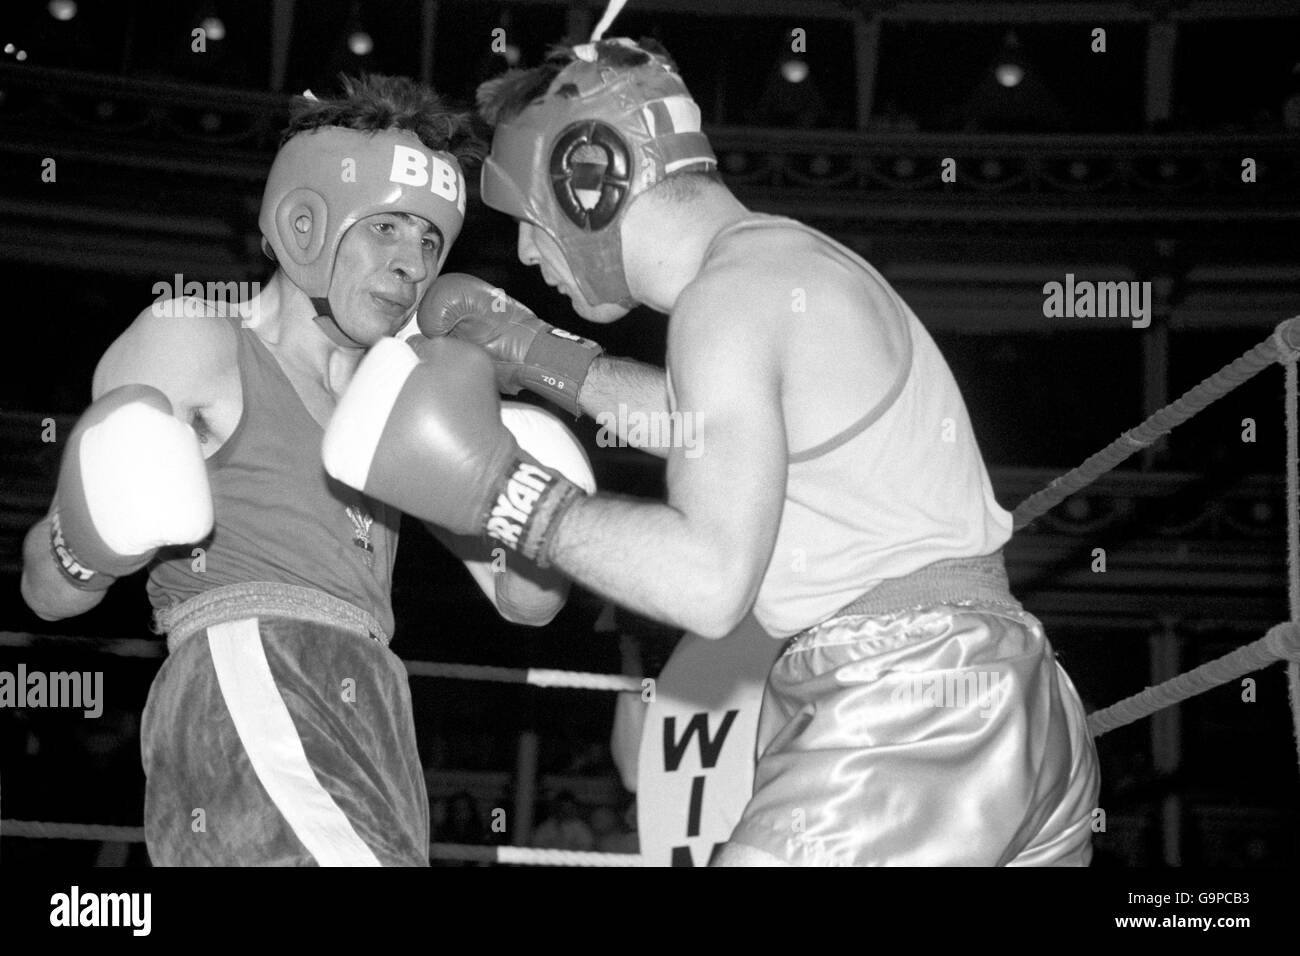 Trevor French (right) of the Combined Services BA fighting Joe Calzaghe of the Welsh ABA, in the 103rd Championships of the ABA. Stock Photo